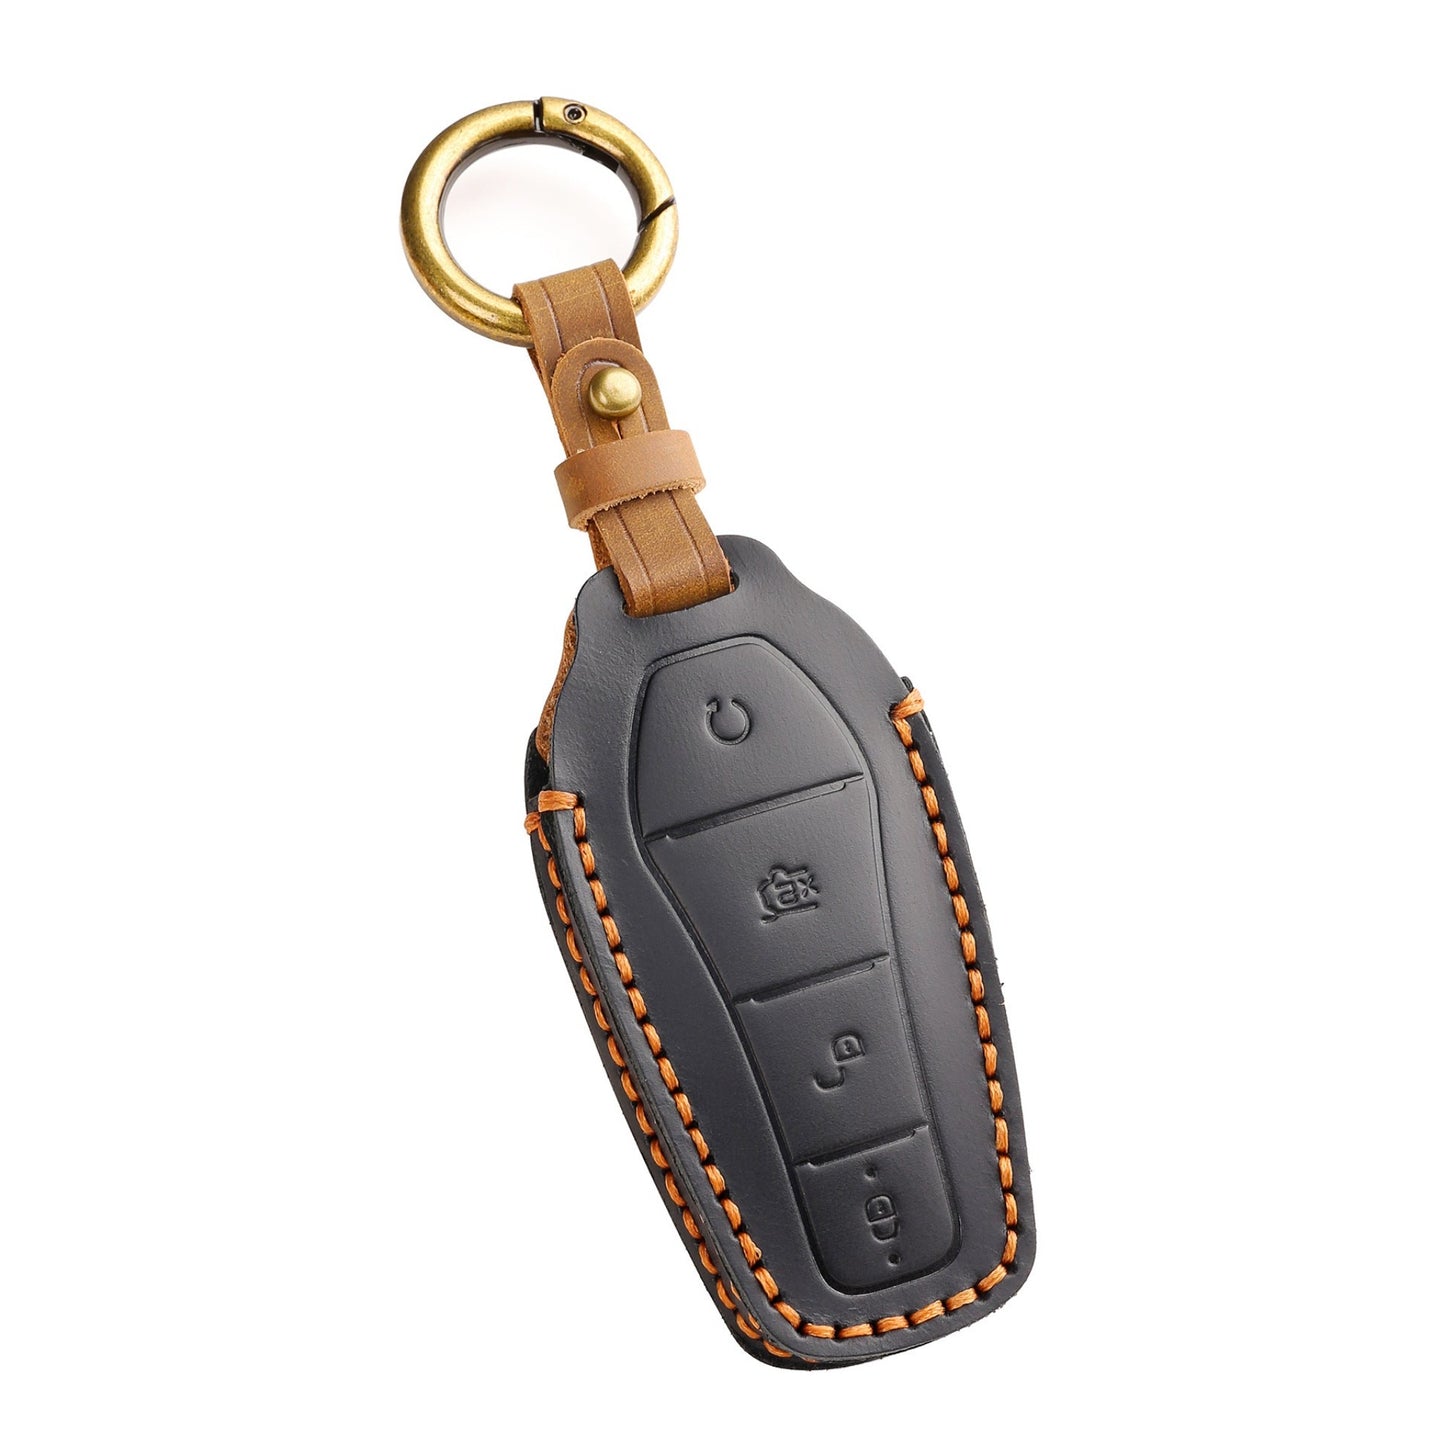 Suitable for BYD ATTO3/DOLPHIN/SEAL/HAN Electric Vehicle Key Protective Cover